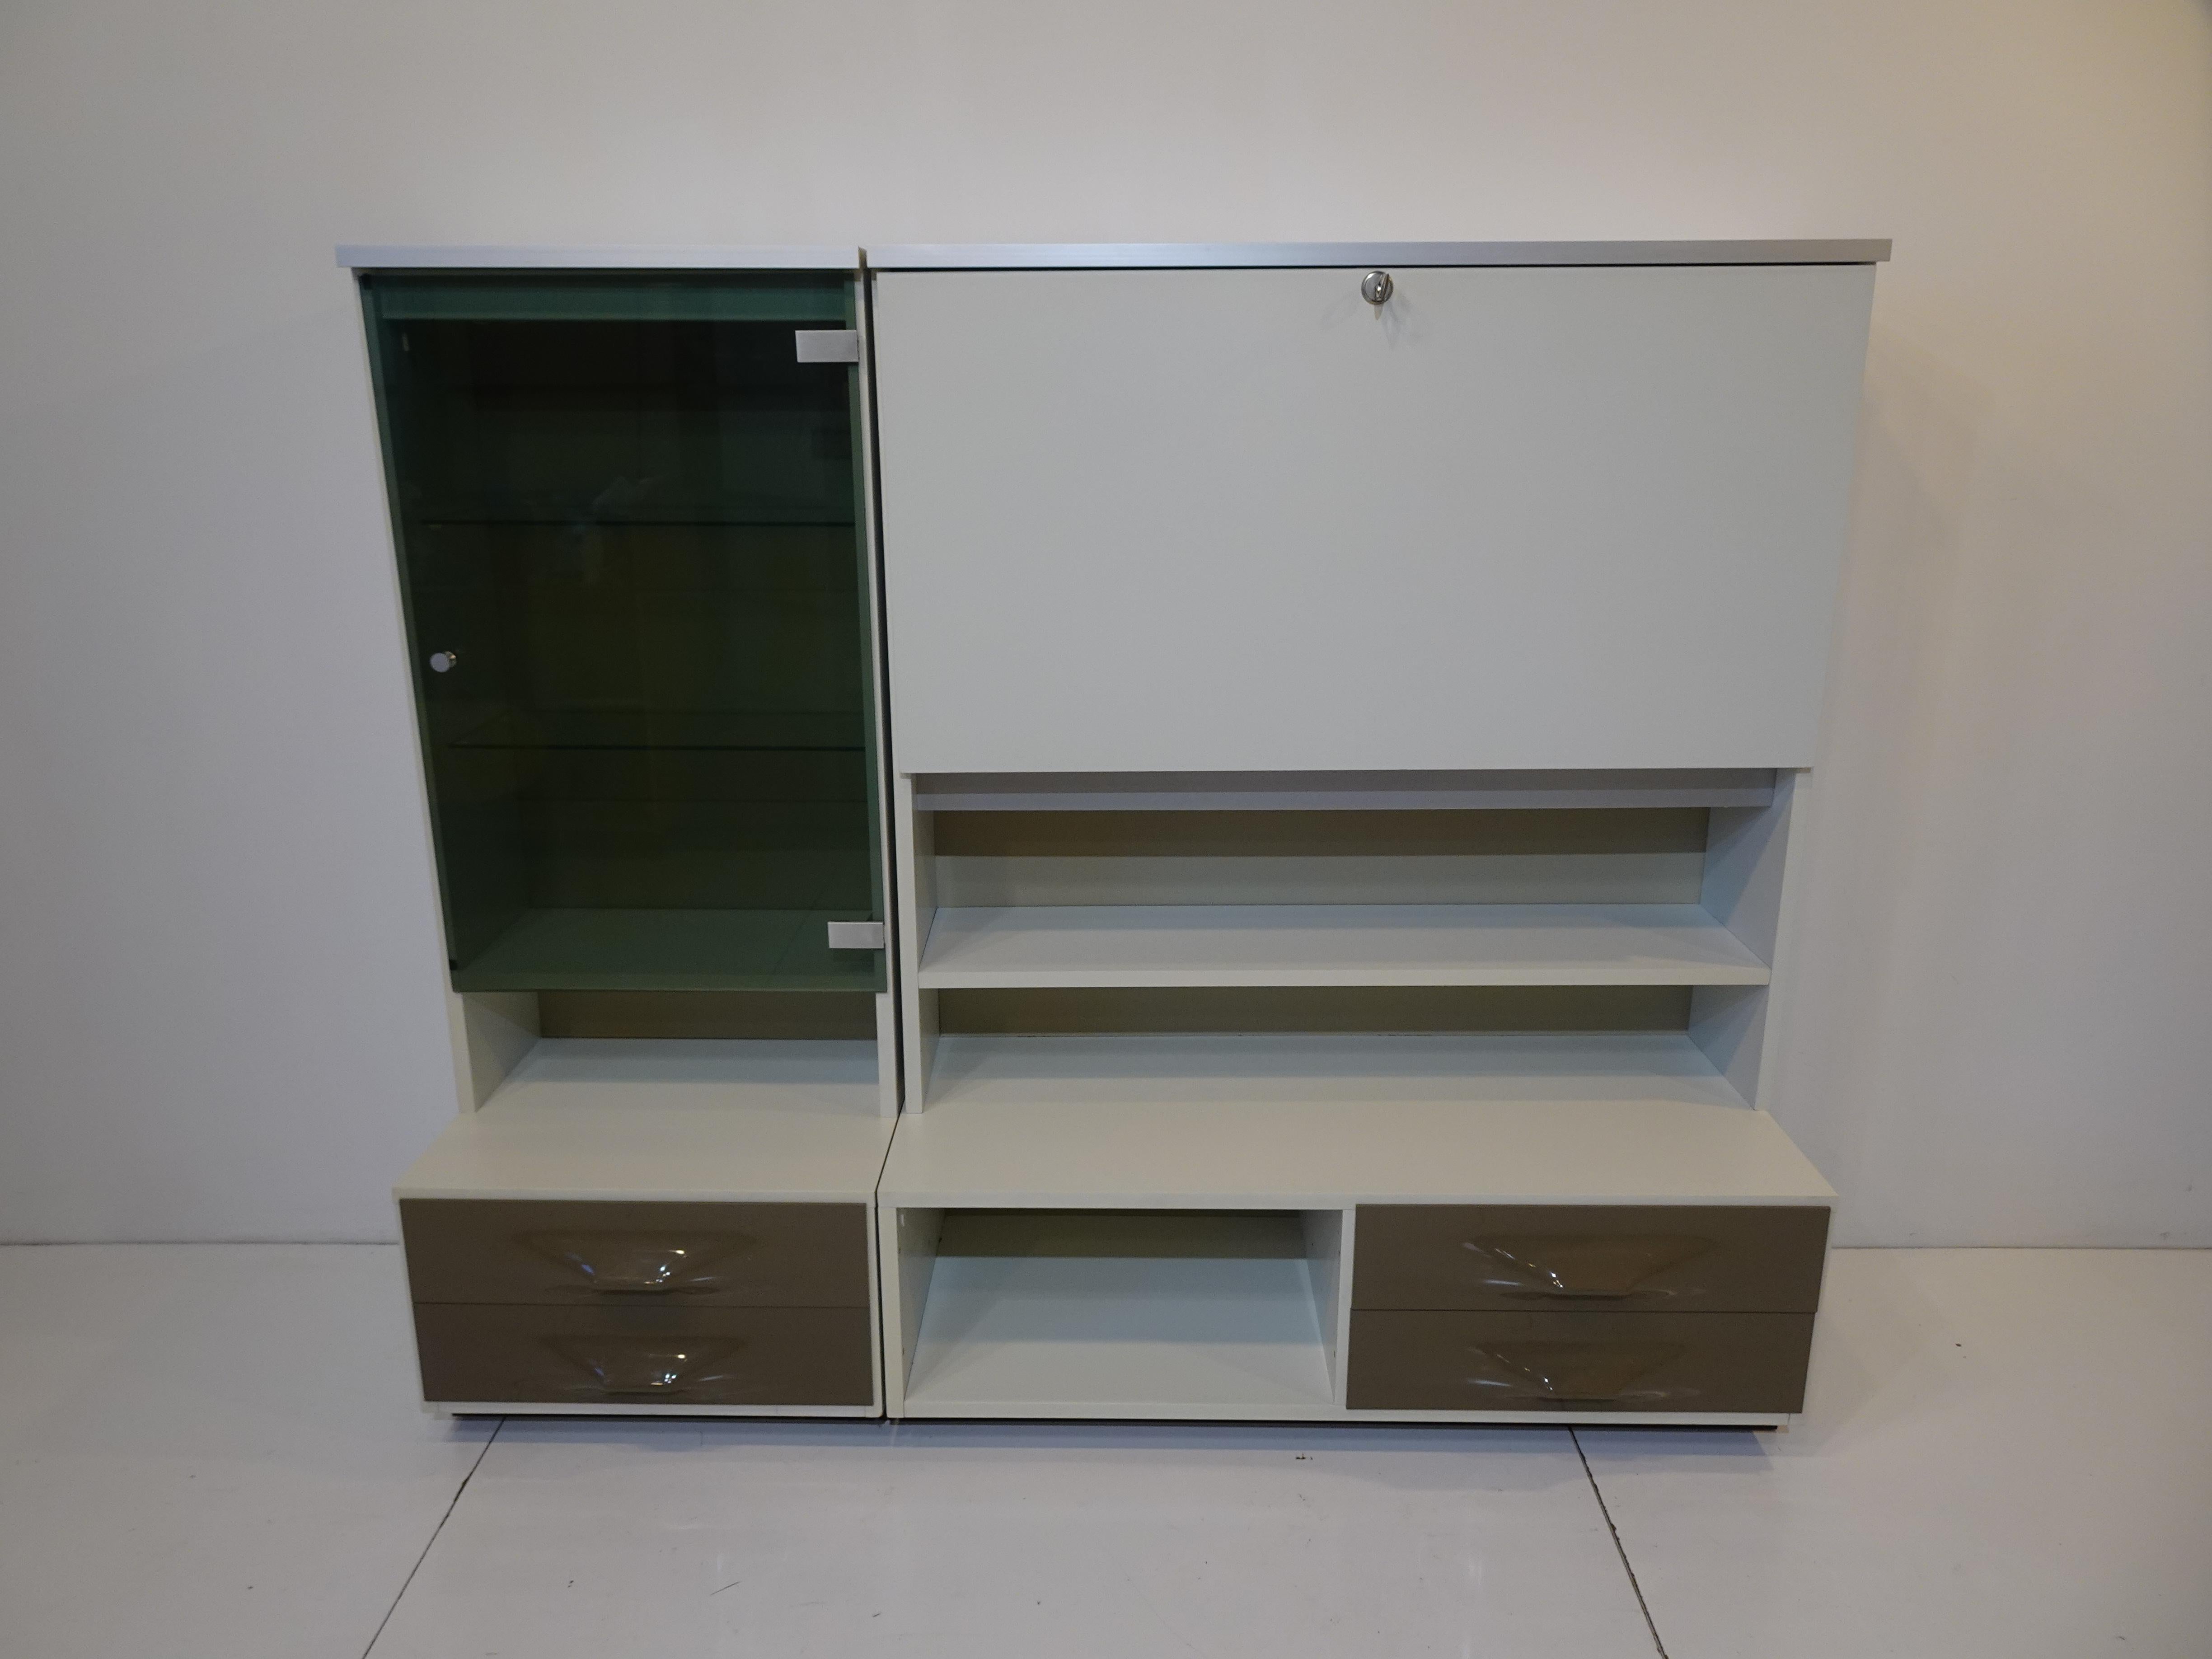 A rare DF 2000 vanity with pull down locking vanity surface, inside having two small glass shelves and a mirror with storage cubies and a jewelry drawer with brushed aluminum pull. To the left side there's a smoked glass door, pull and brushed